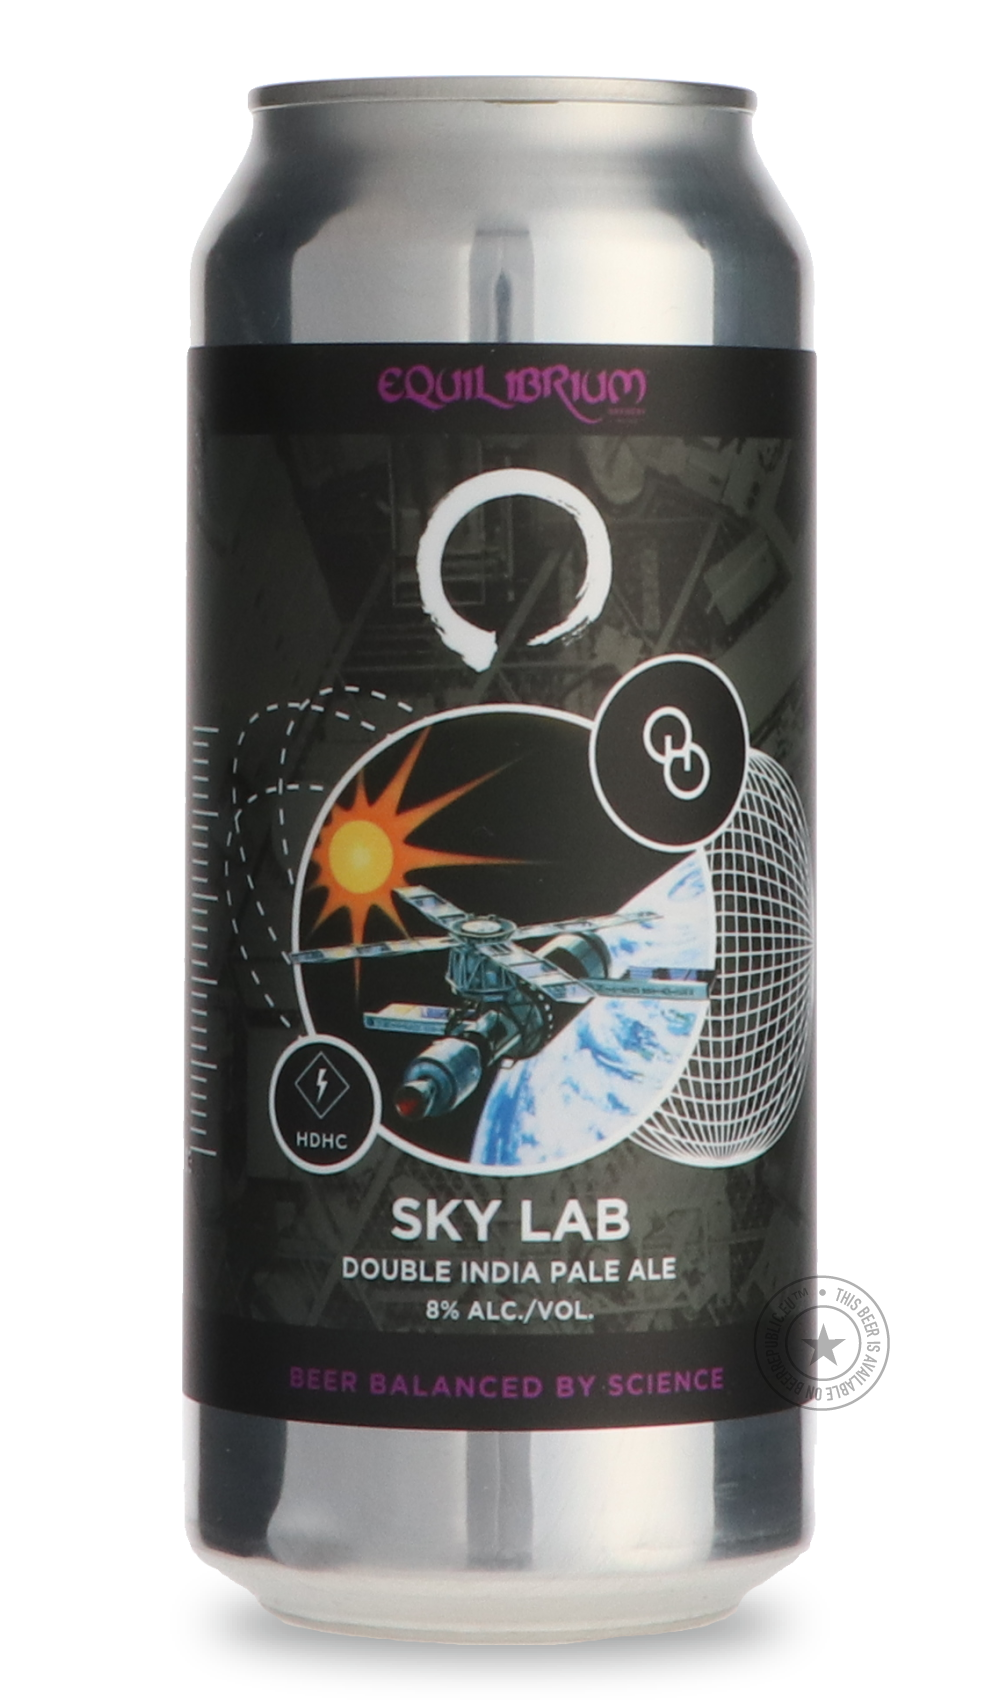 -Equilibrium- Sky Lab / Other Half-IPA- Only @ Beer Republic - The best online beer store for American & Canadian craft beer - Buy beer online from the USA and Canada - Bier online kopen - Amerikaans bier kopen - Craft beer store - Craft beer kopen - Amerikanisch bier kaufen - Bier online kaufen - Acheter biere online - IPA - Stout - Porter - New England IPA - Hazy IPA - Imperial Stout - Barrel Aged - Barrel Aged Imperial Stout - Brown - Dark beer - Blond - Blonde - Pilsner - Lager - Wheat - Weizen - Amber 